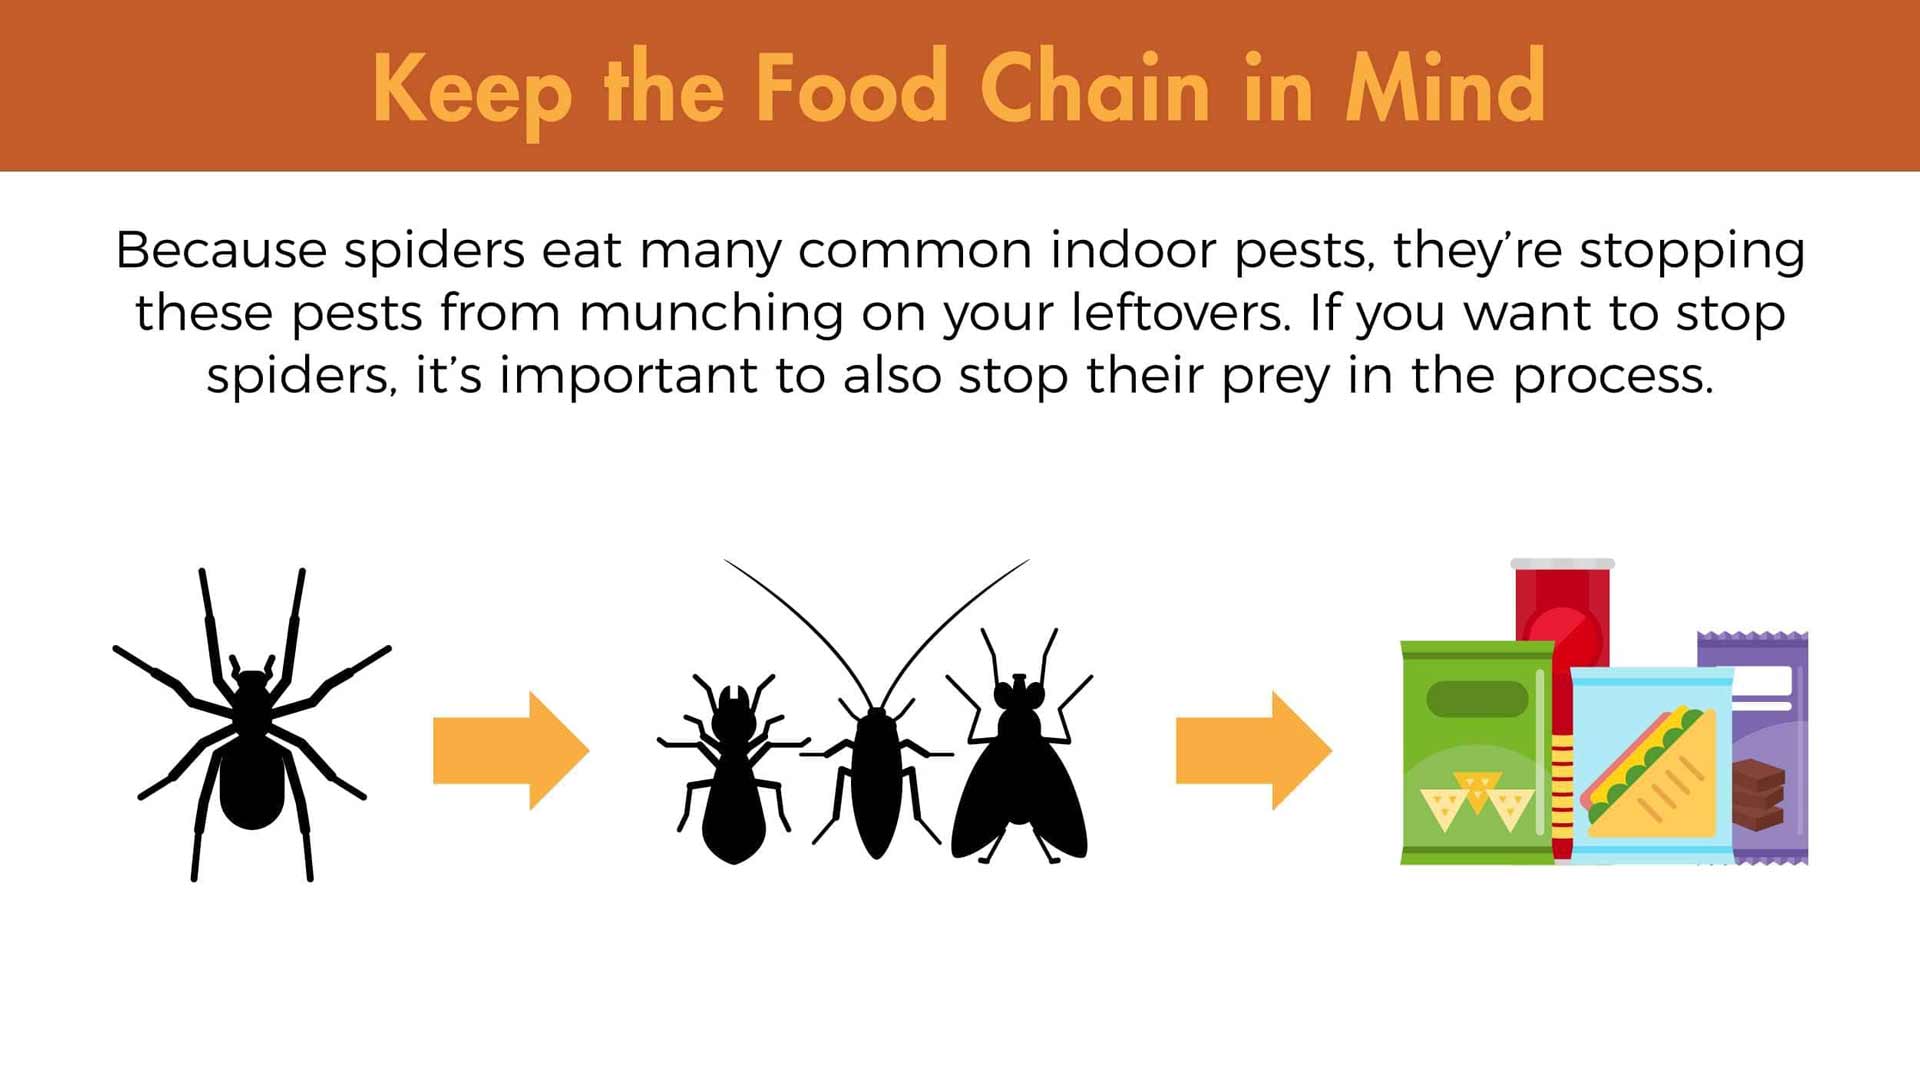 Keep the food chain in mind. Because spiders eat many common indoor pests, they're stopping these pests from munching on your leftovers. If you want to stop spiders, it's important to also stop their prey in the process.